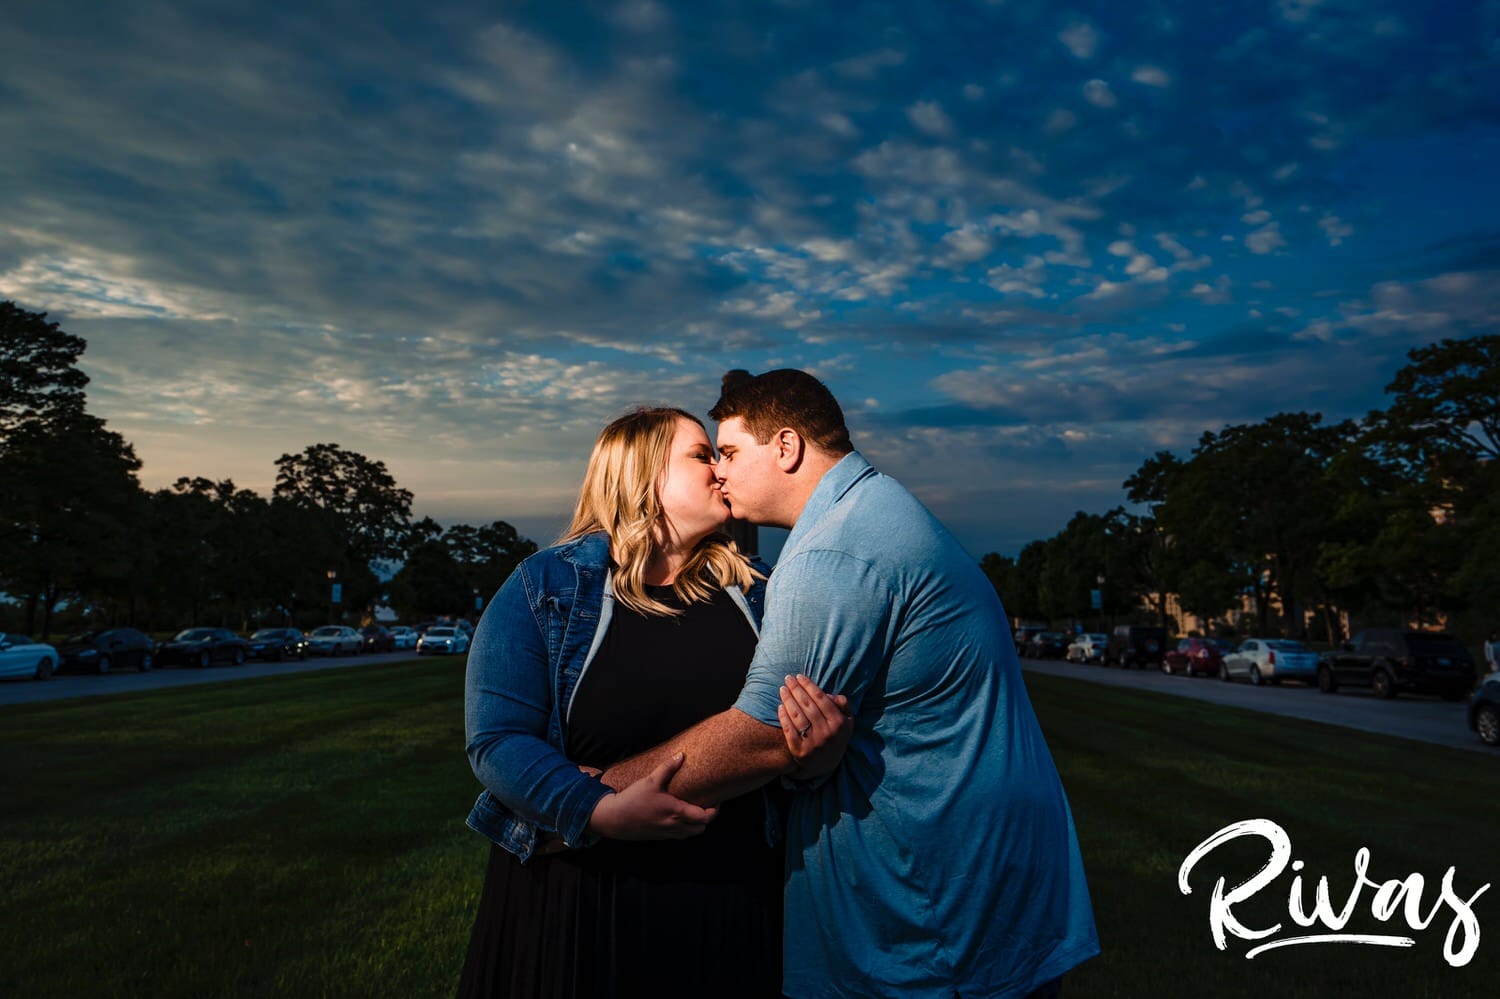 A colorful portrait of an engaged couple sharing an embrace and kiss in front of a bright blue sky with swirly clouds during their engagement photography session at Liberty Memorial in Kansas City. 